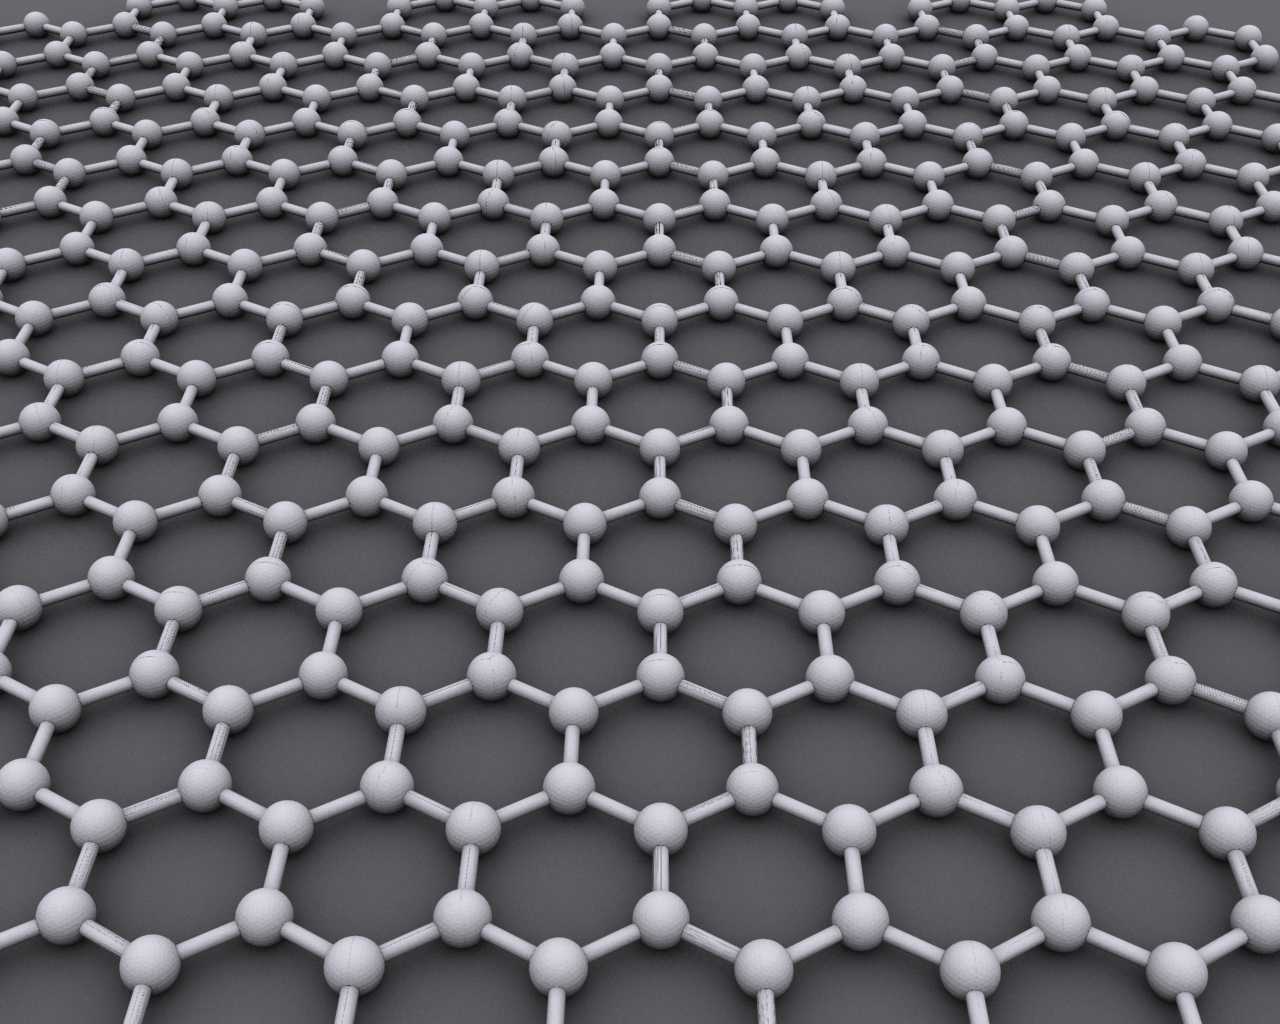 A hexagonal lattice computer-generated illustration of the molecular structure of graphene.